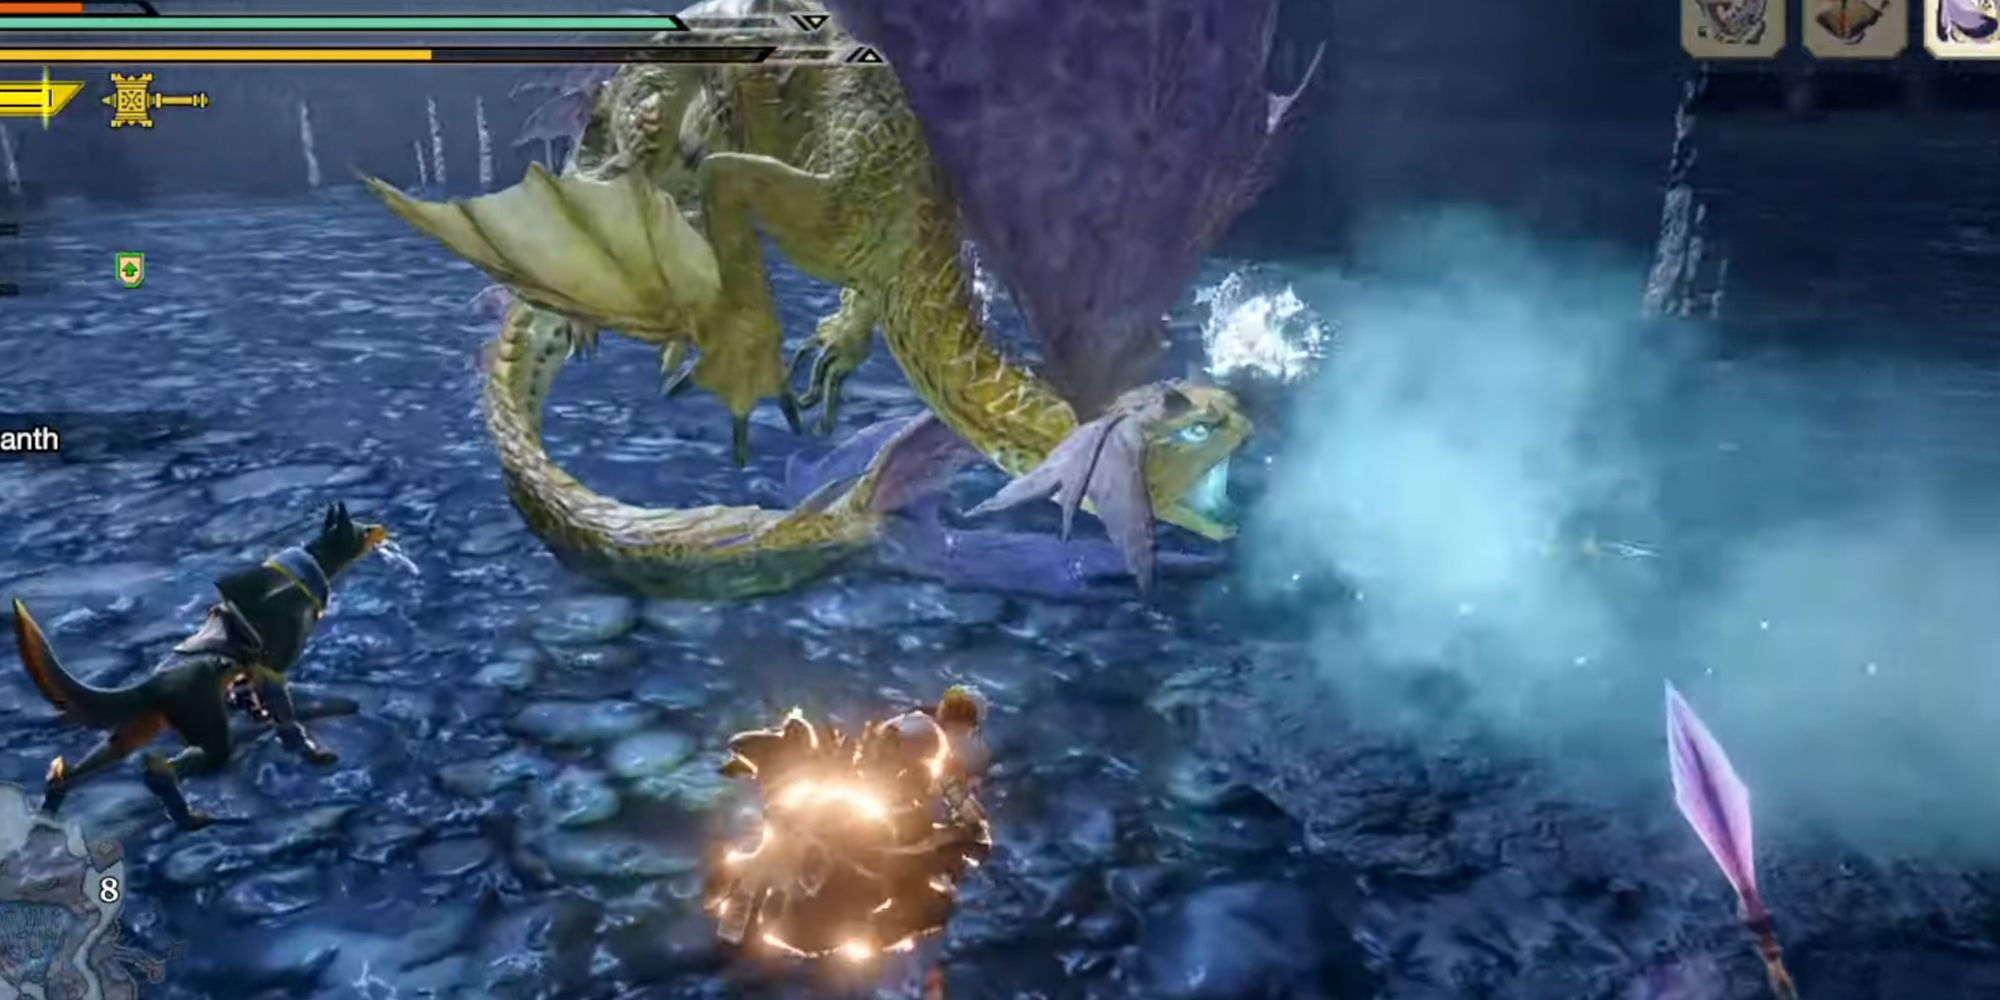 monster hunter rise characters fighting a huge green dragon. dragon breathing out cold air.